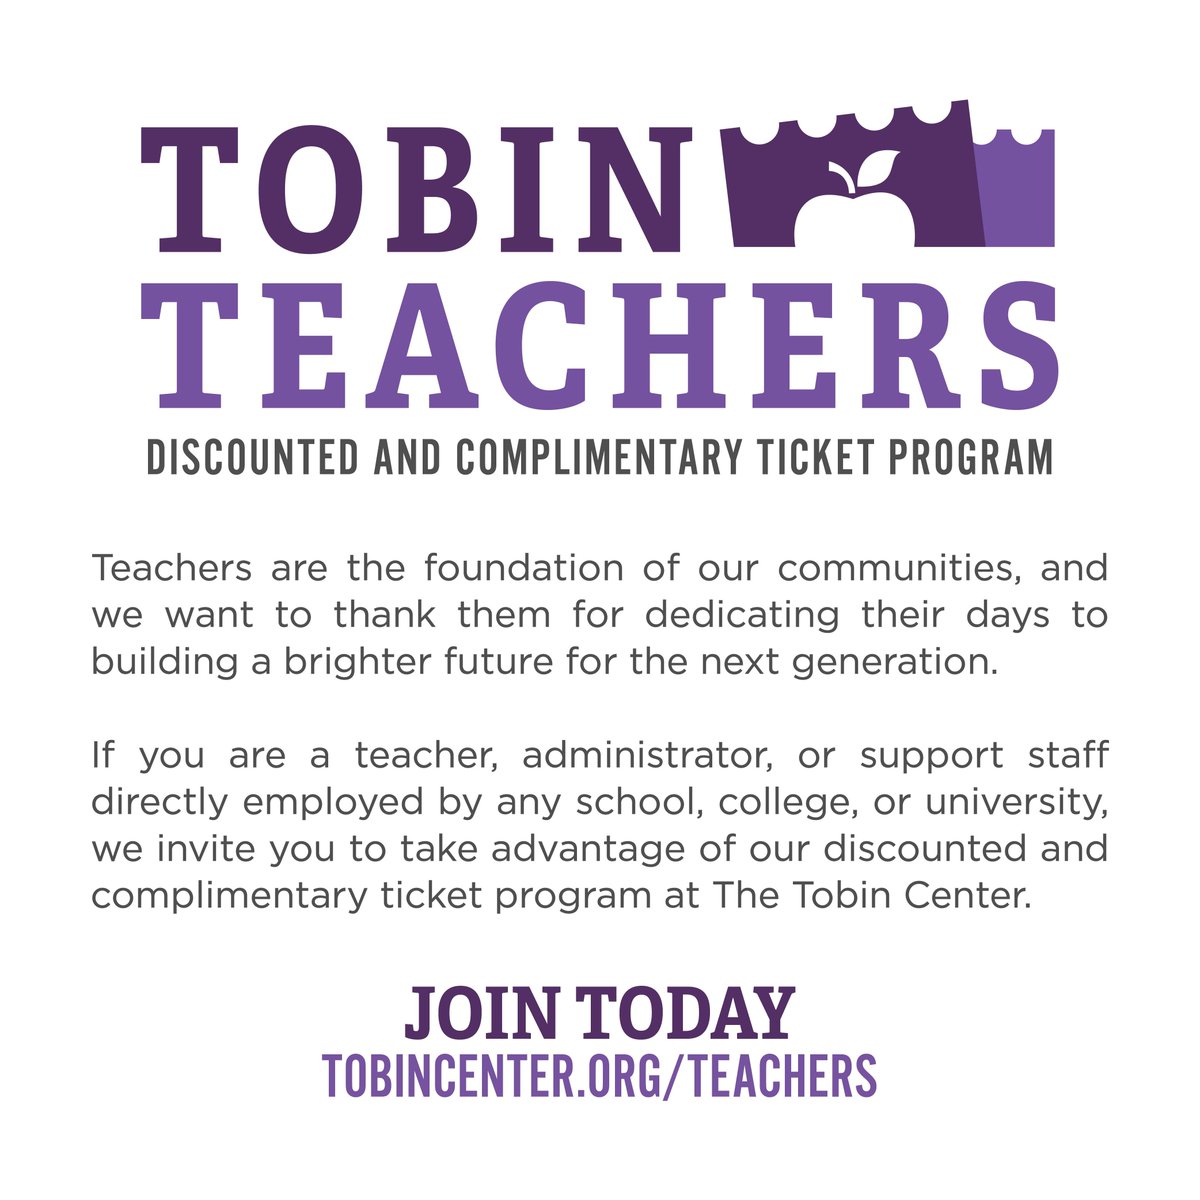 🍎✏️ The Tobin Center is proud to announce Tobin Teachers! A new discount and complimentary ticket program just for educators! Join Tobin Teachers today for discounted and complimentary tickets at tobincenter.org/teachers